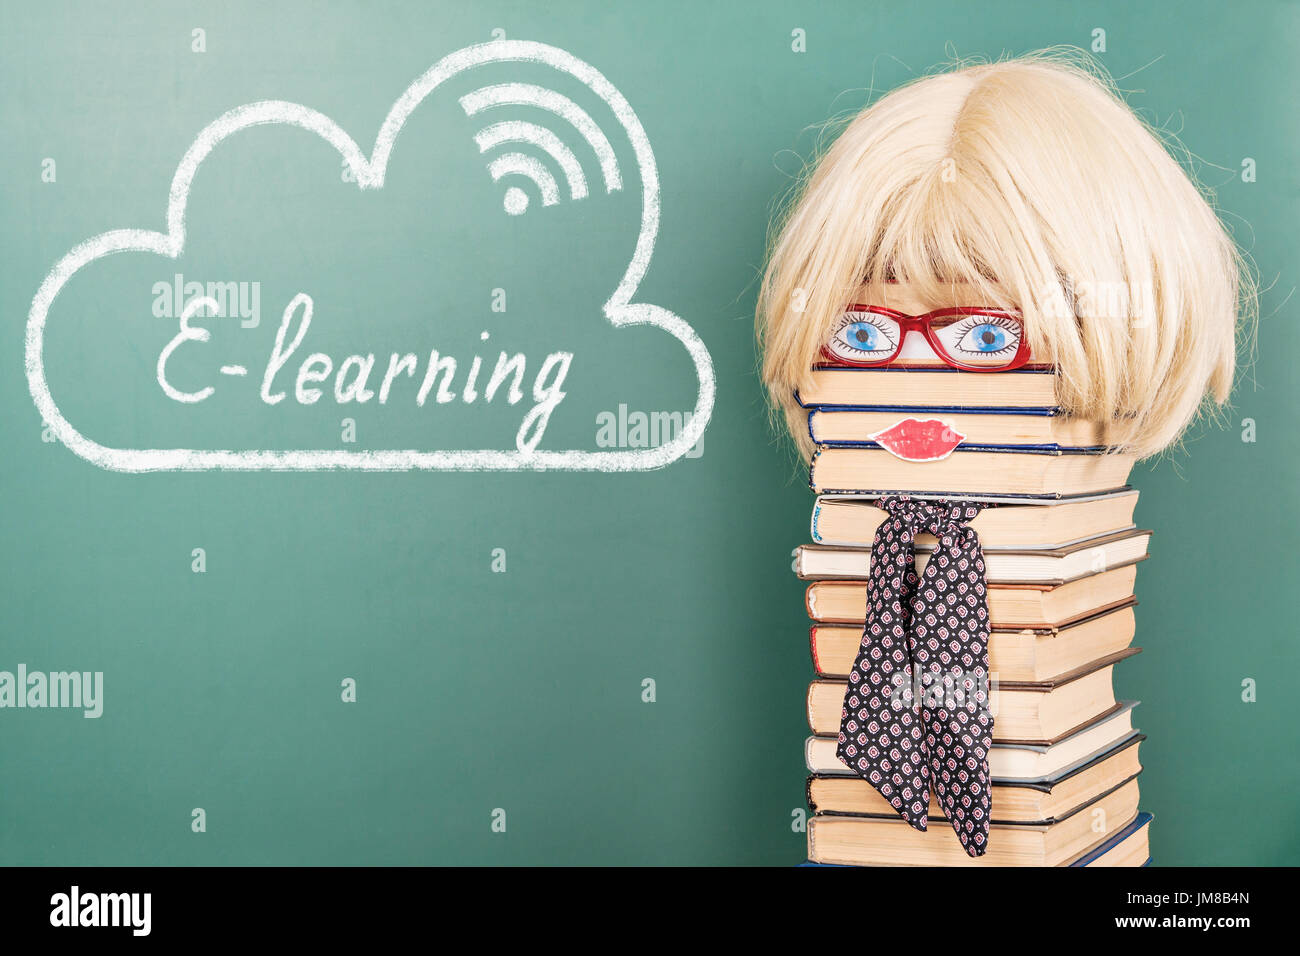 E-Learning funny education concept with unusual women teacher Stock Photo